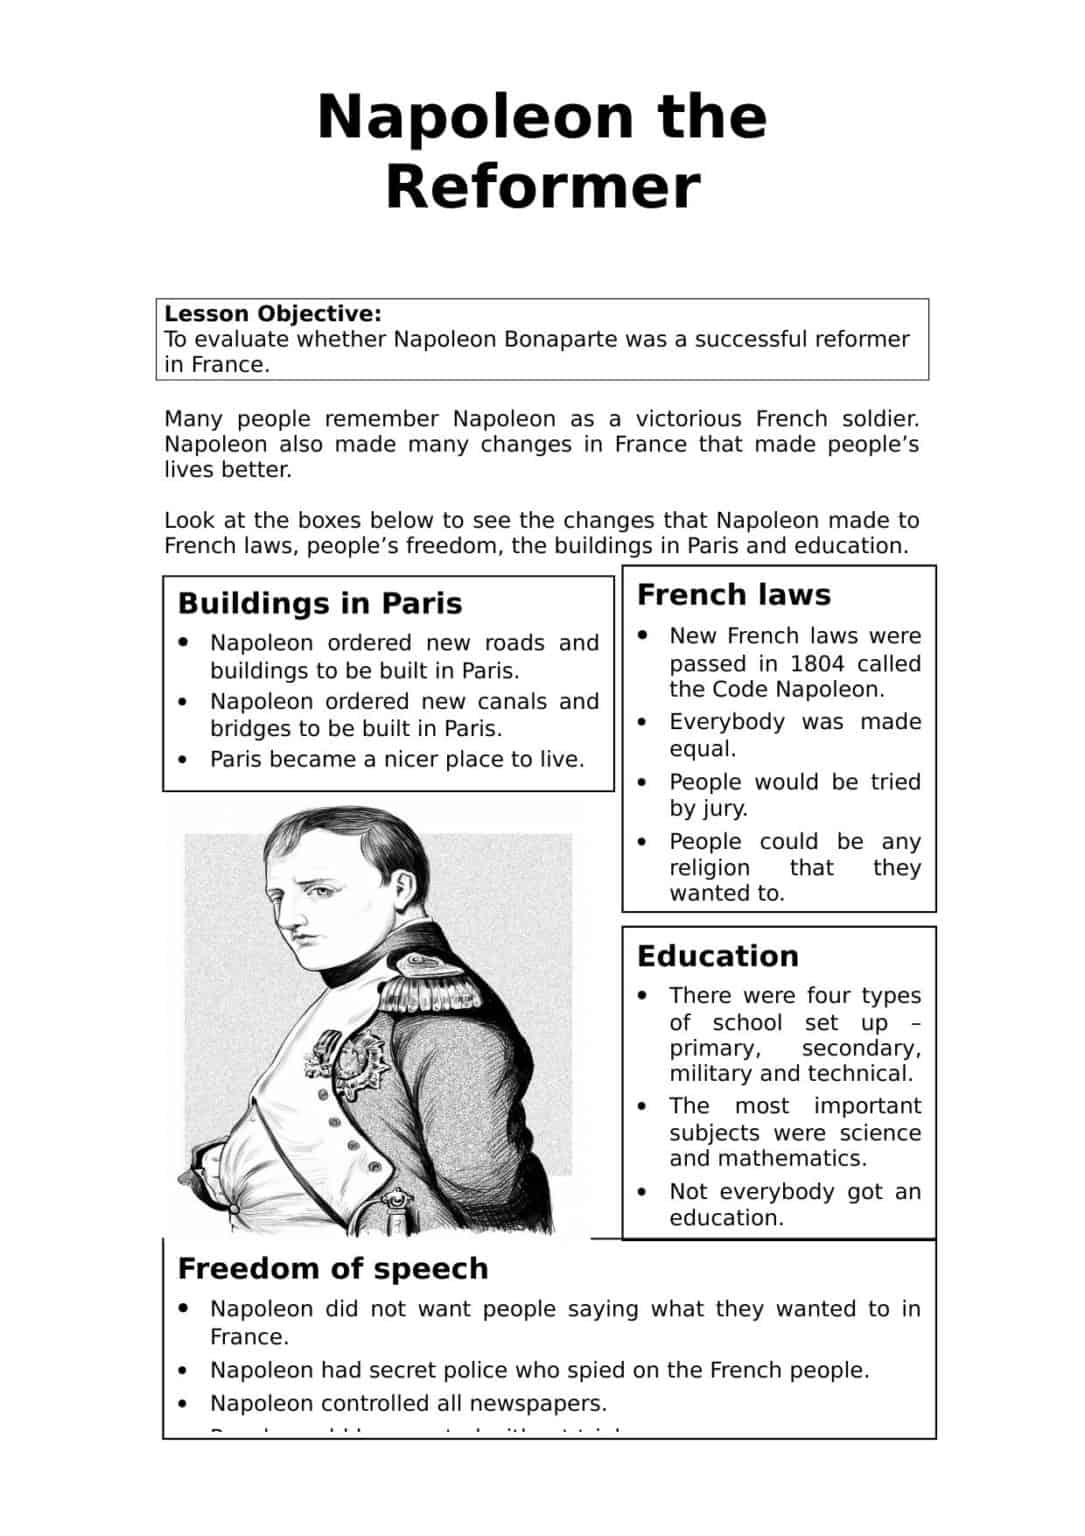 napoleon-the-reformer-worksheet-history-lessons-resources